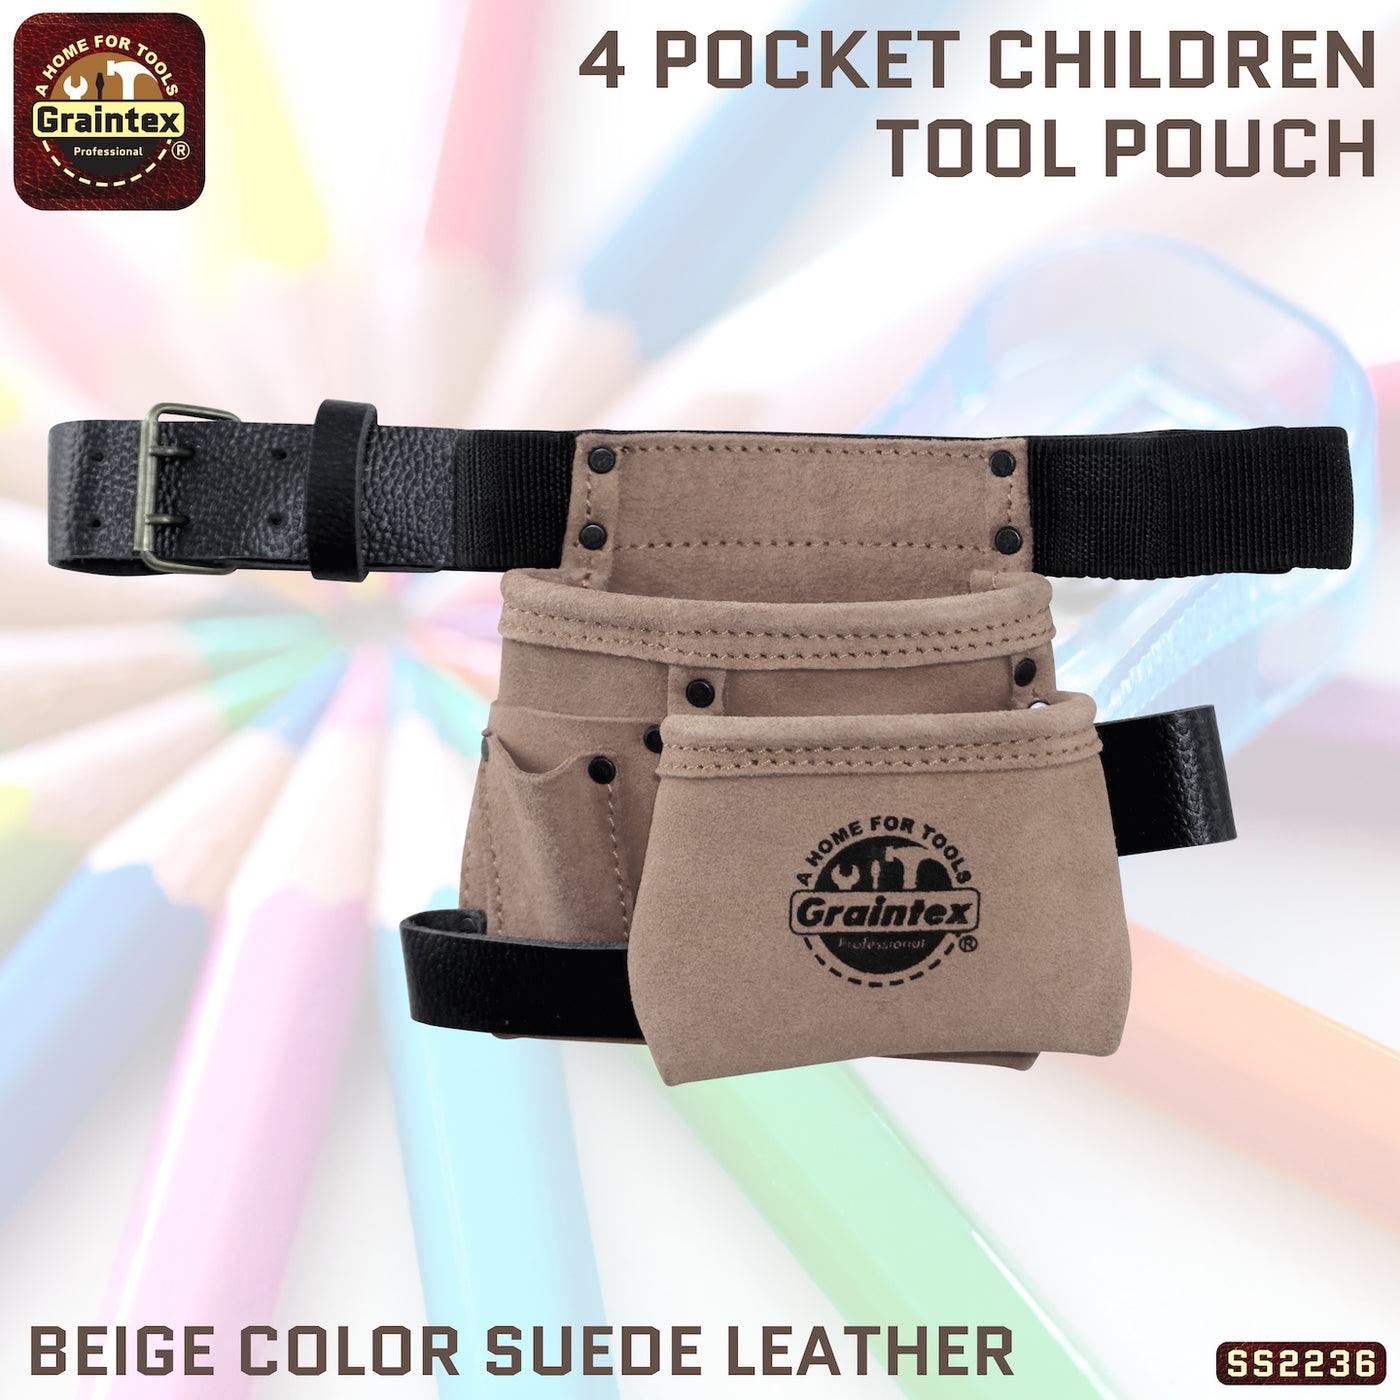 SS2236 :: 4 Pocket Children Tool Pouch Beige Color Suede Leather